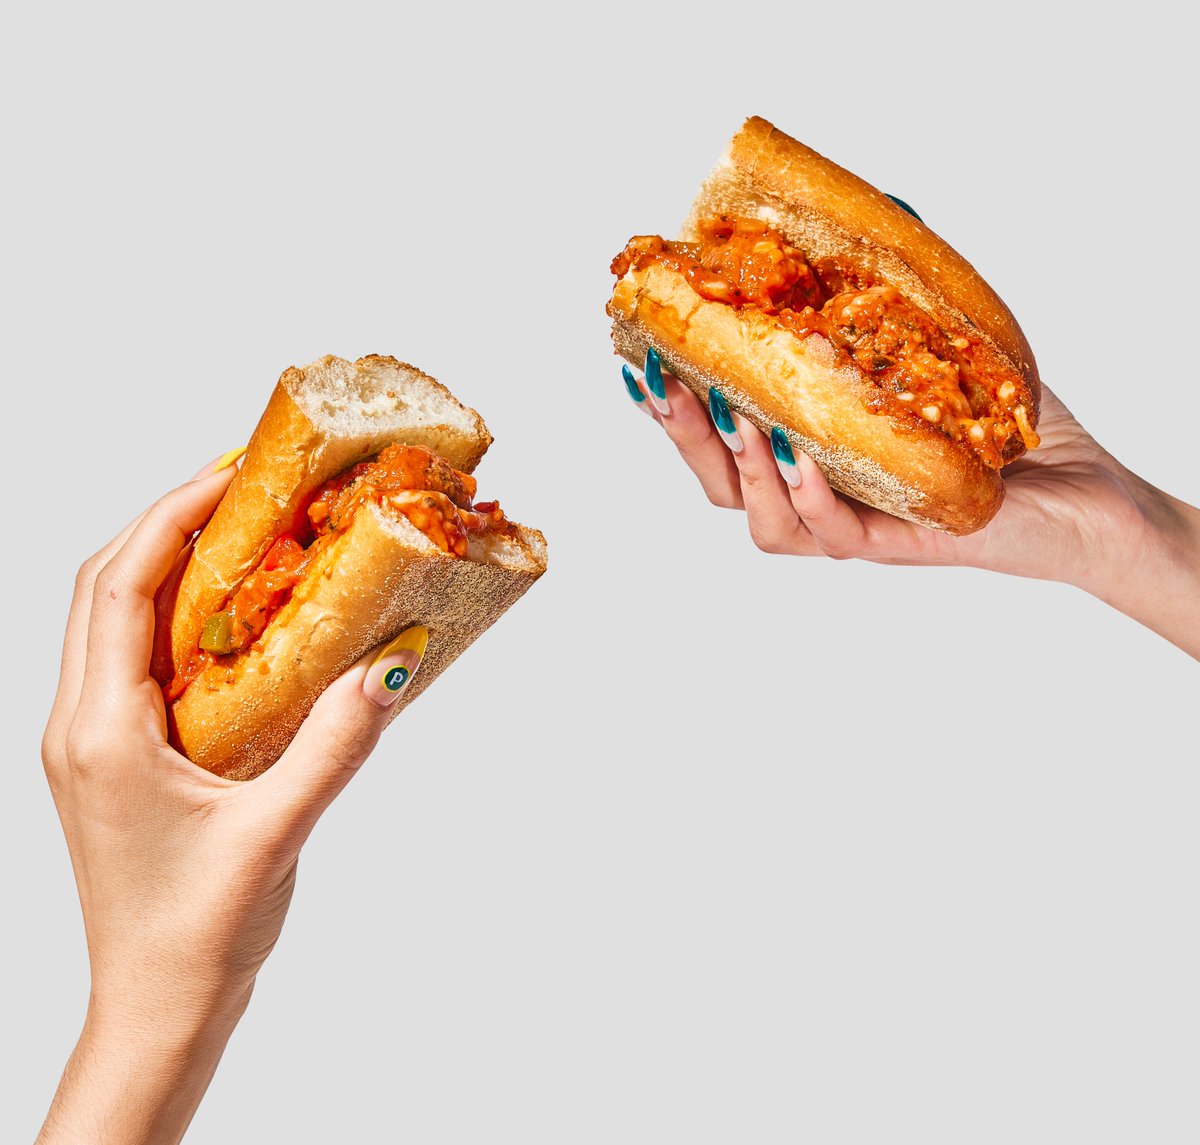 We're having a sampling event this Friday, November 3rd! 🎉 Come by and try our delicious Meatball Sub at Flaming Grill (924 Kings Hwy in Brooklyn) from 11:30AM to 1PM! 🌟